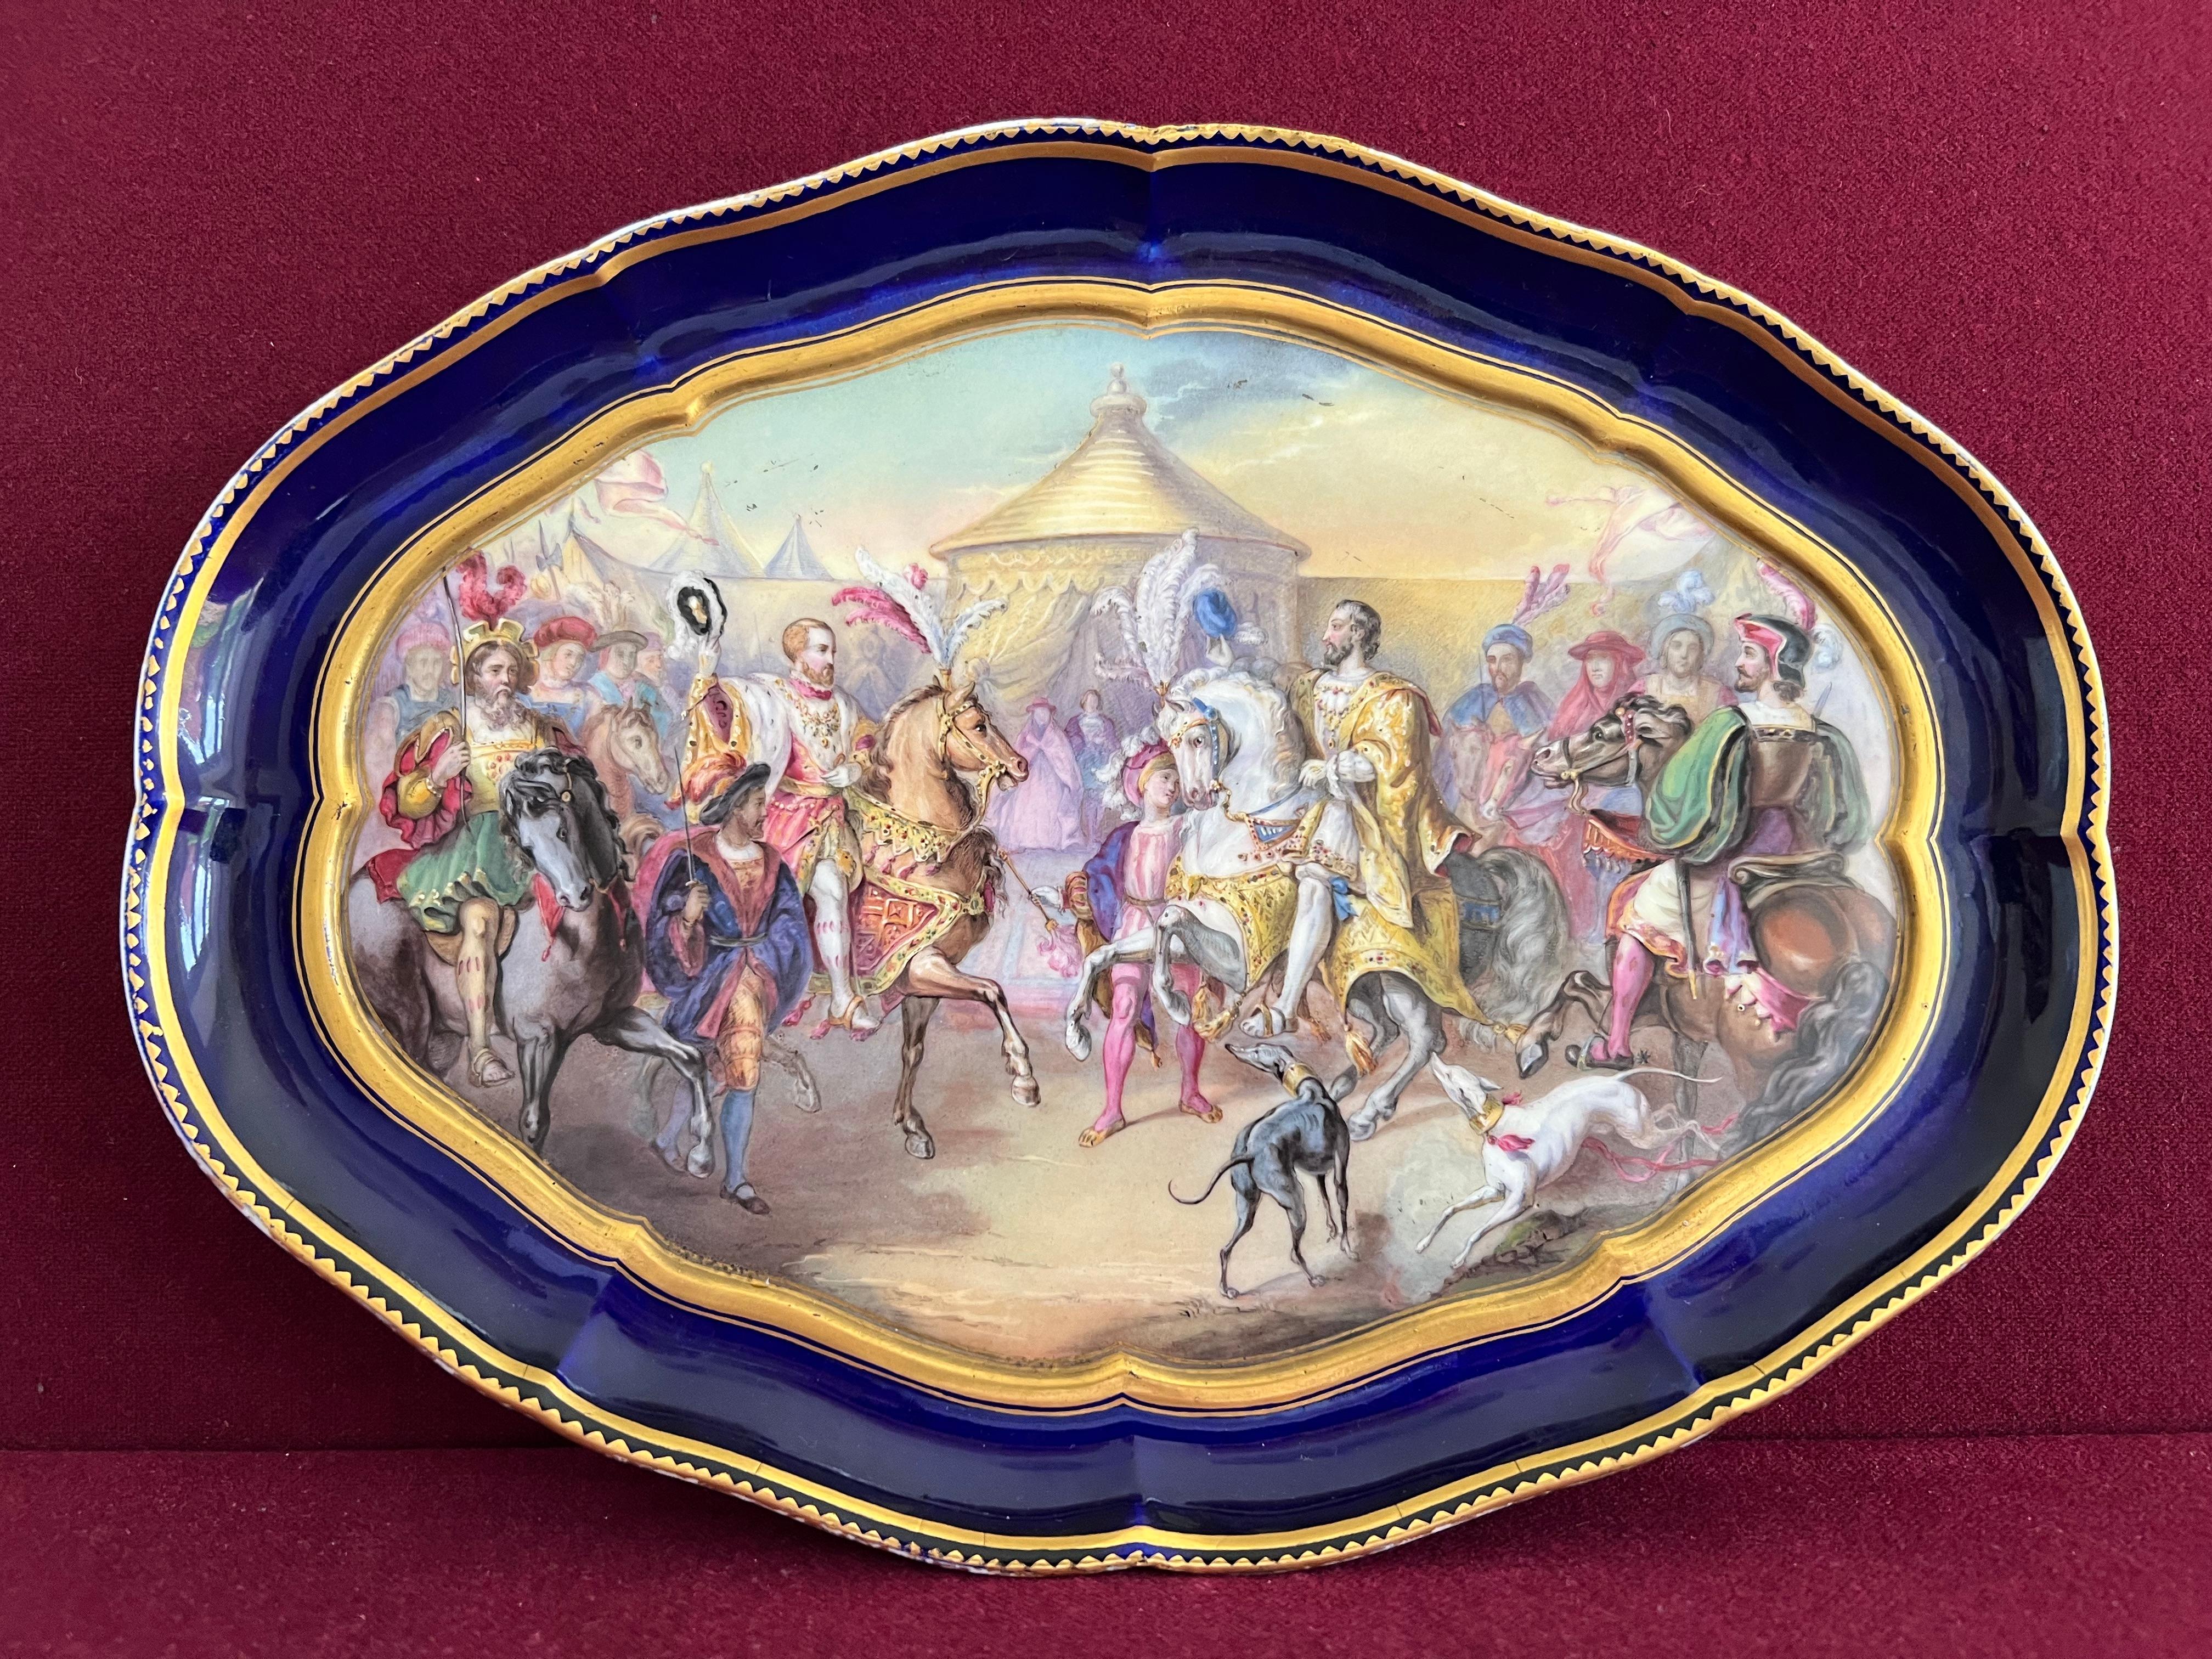 An interesting Sevres porcelain dish dating from around 1770 with later added decoration attributed to the English workshop of Thomas Martin Randall at Madeley c.1830. This little factory specialised in the decoration and re-decoration of of